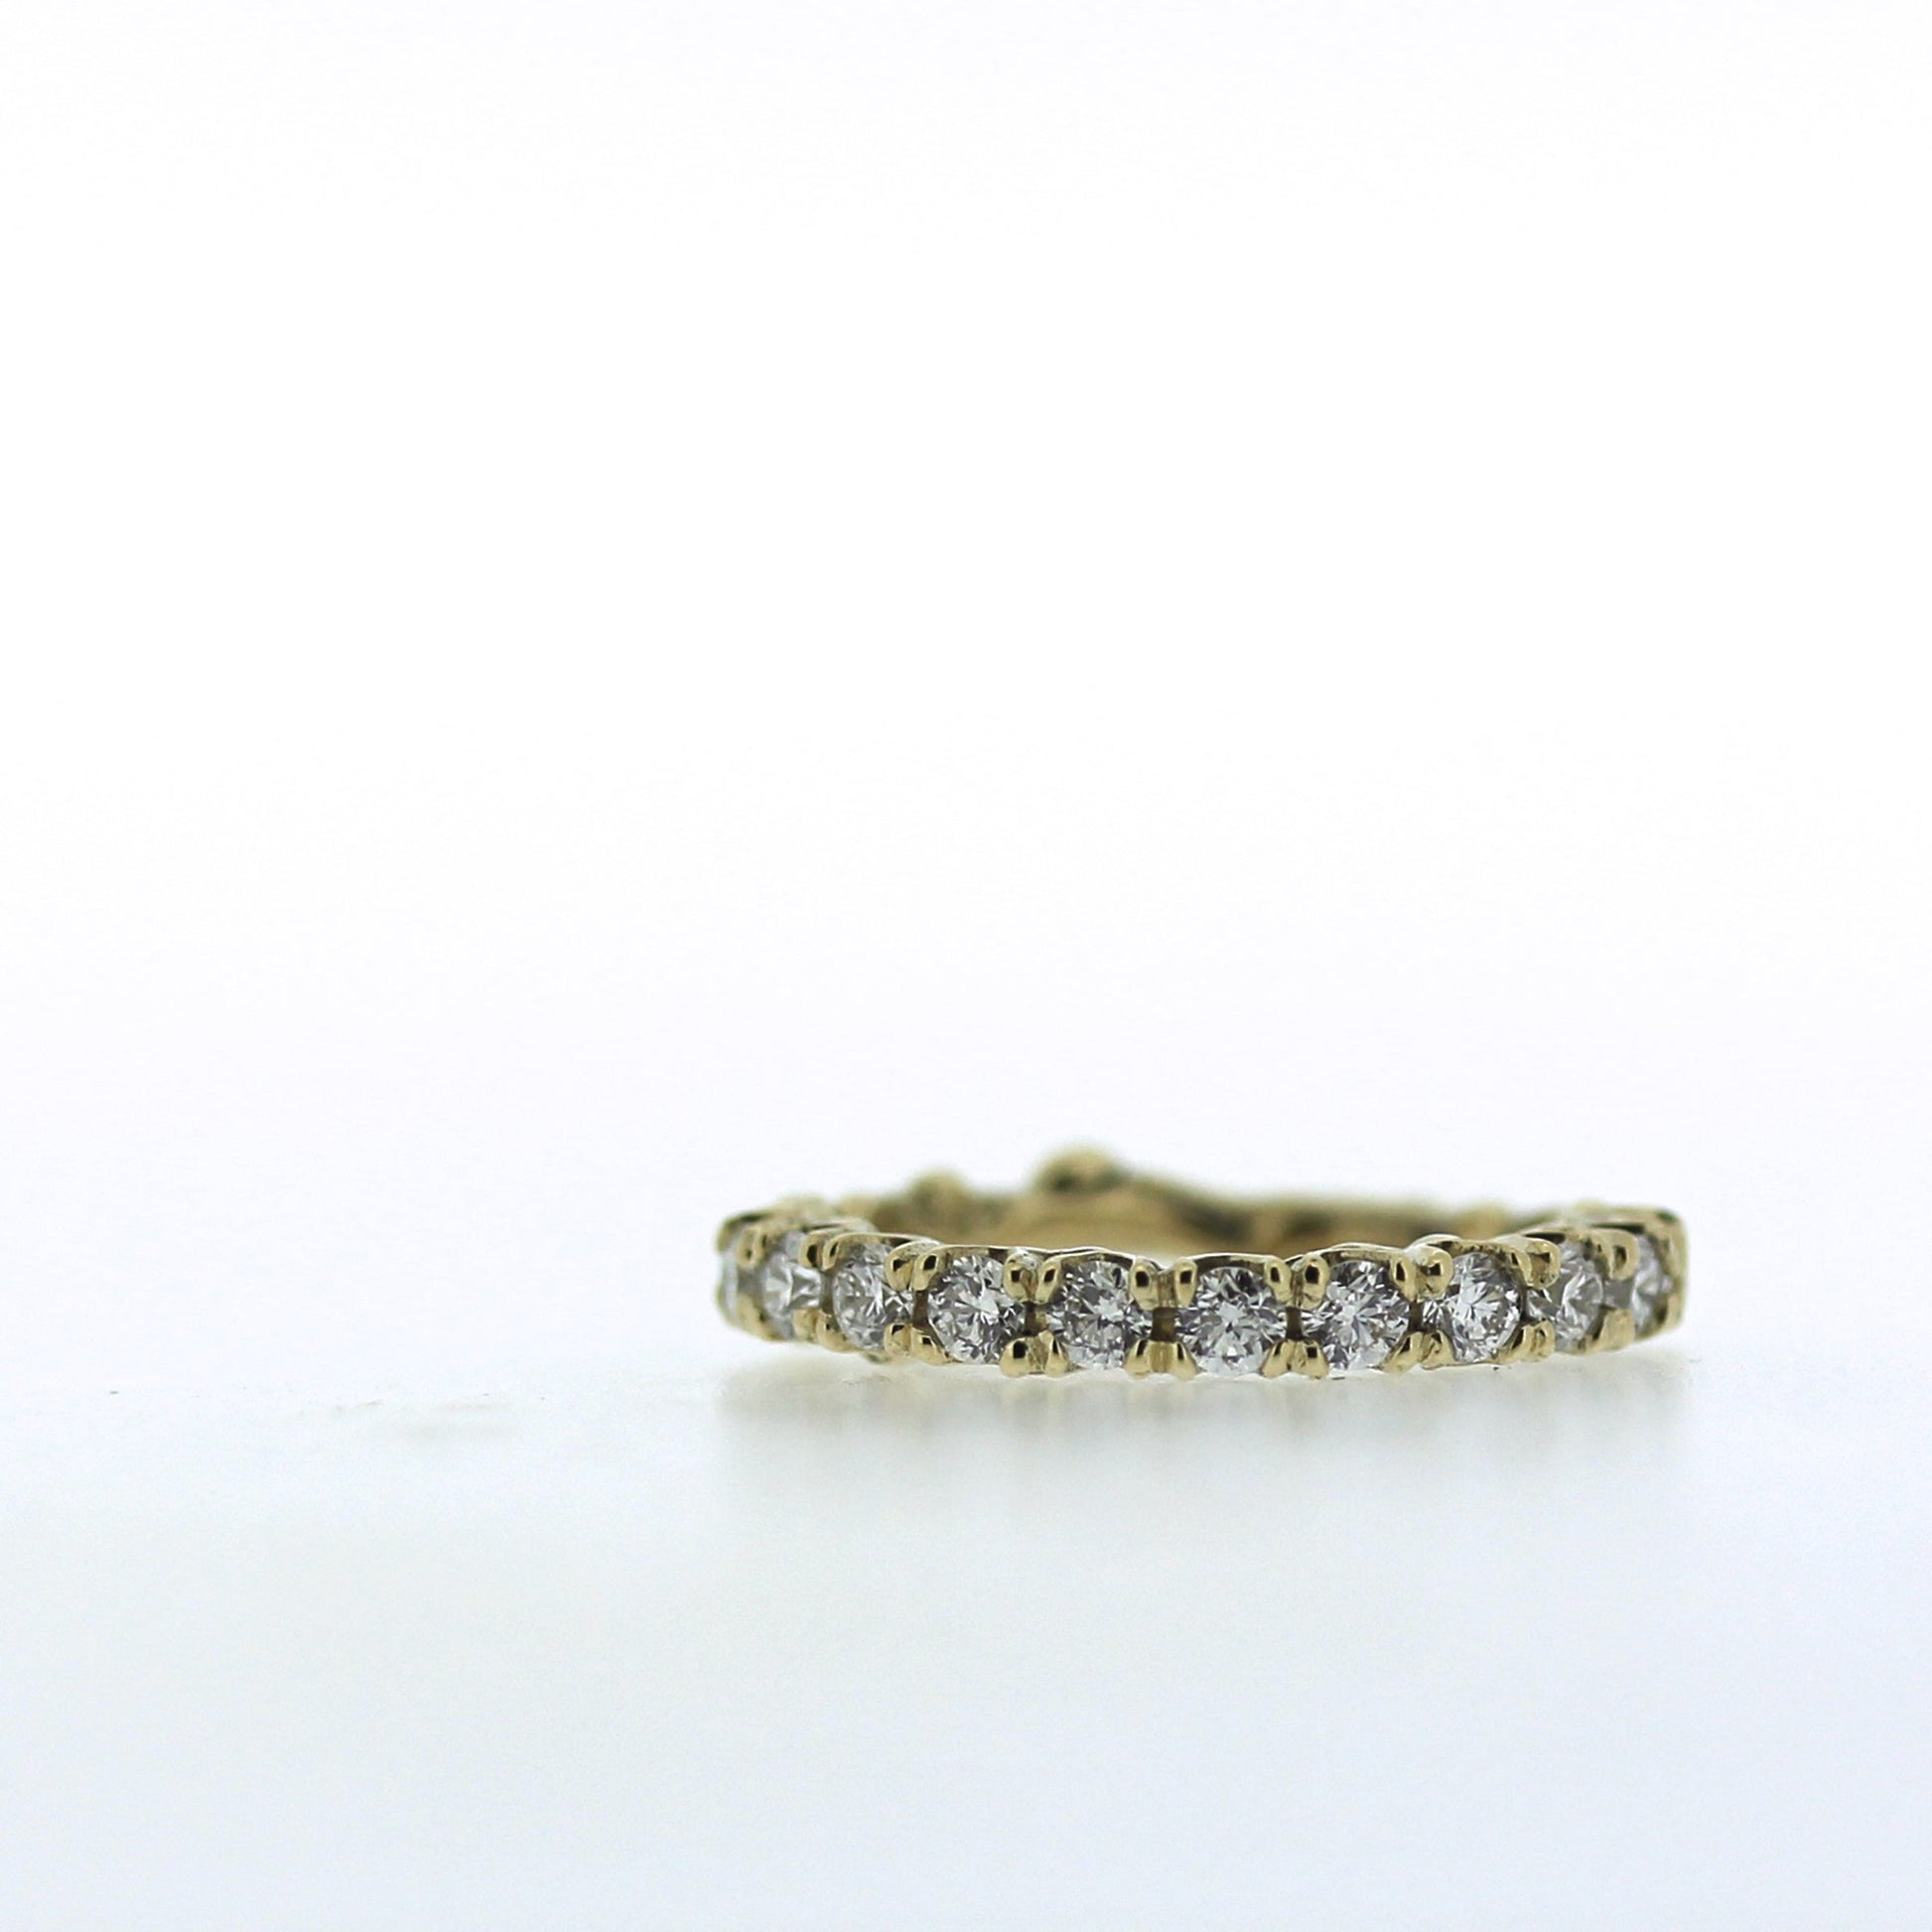 2mm diamond engagement half eternity band with unique organic texture and side viewing